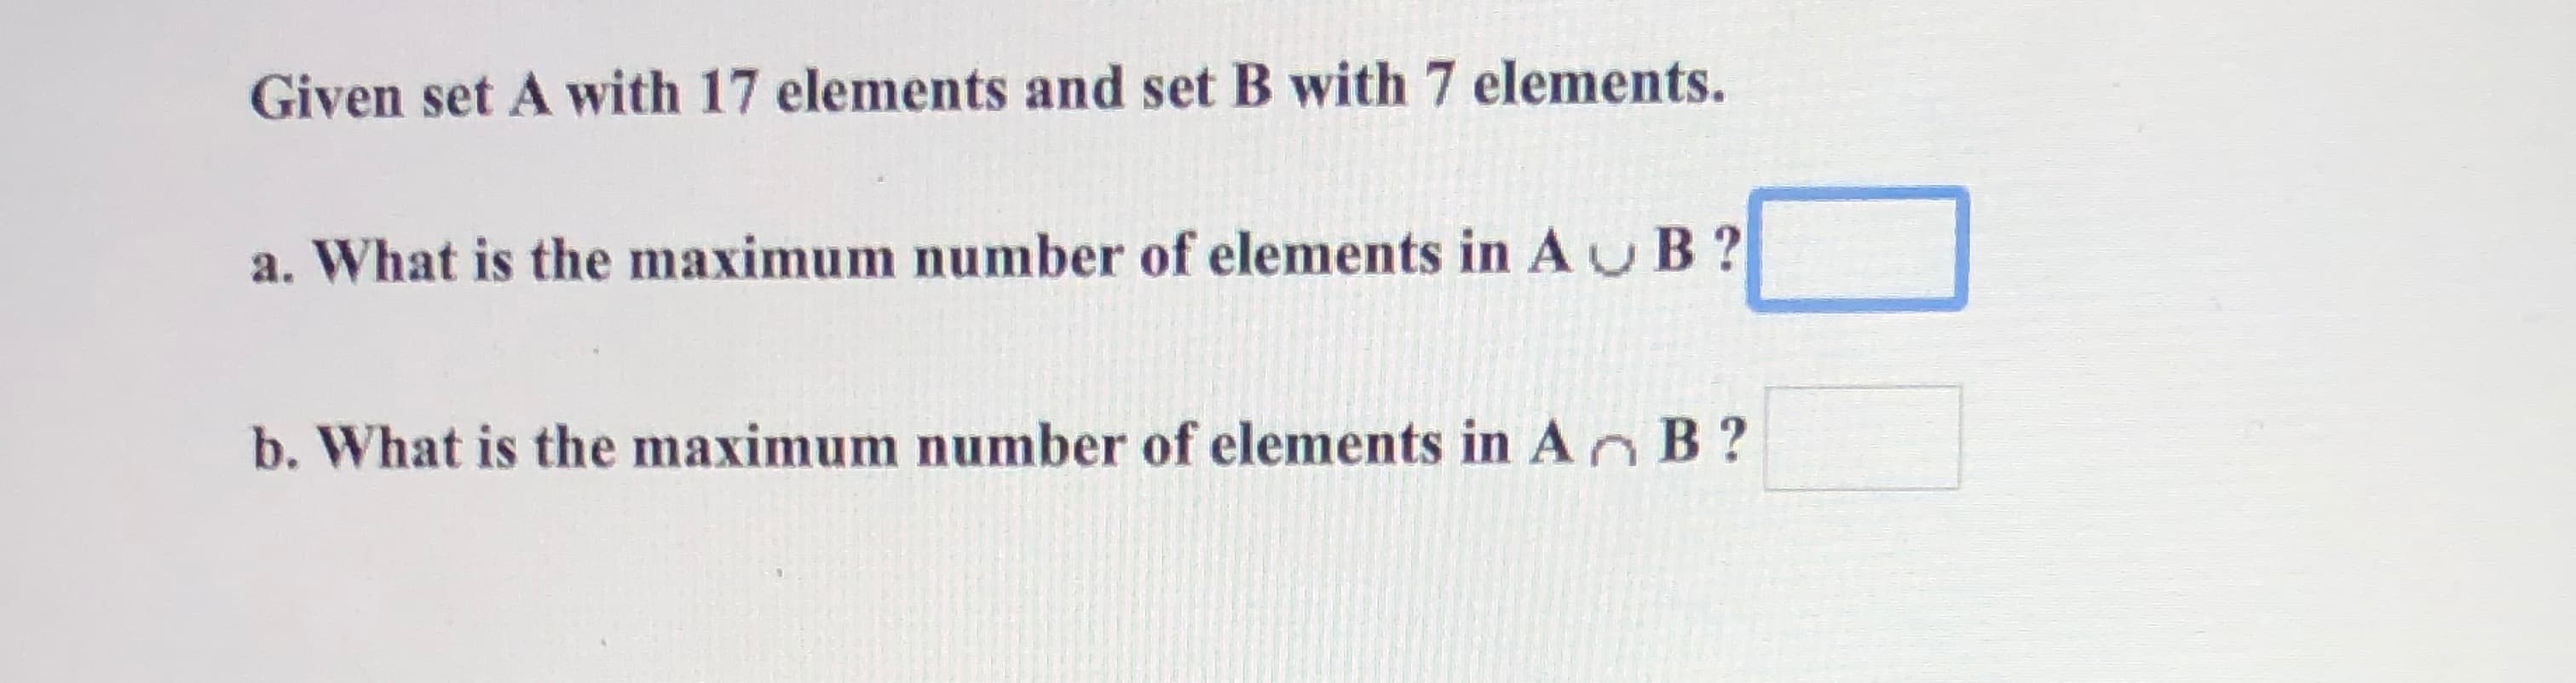 Given set A with 17 elements and set B with 7 elements.
a. What is the maximum number of elements in Au B ?
b. What is the maximum number of elements in An B ?
